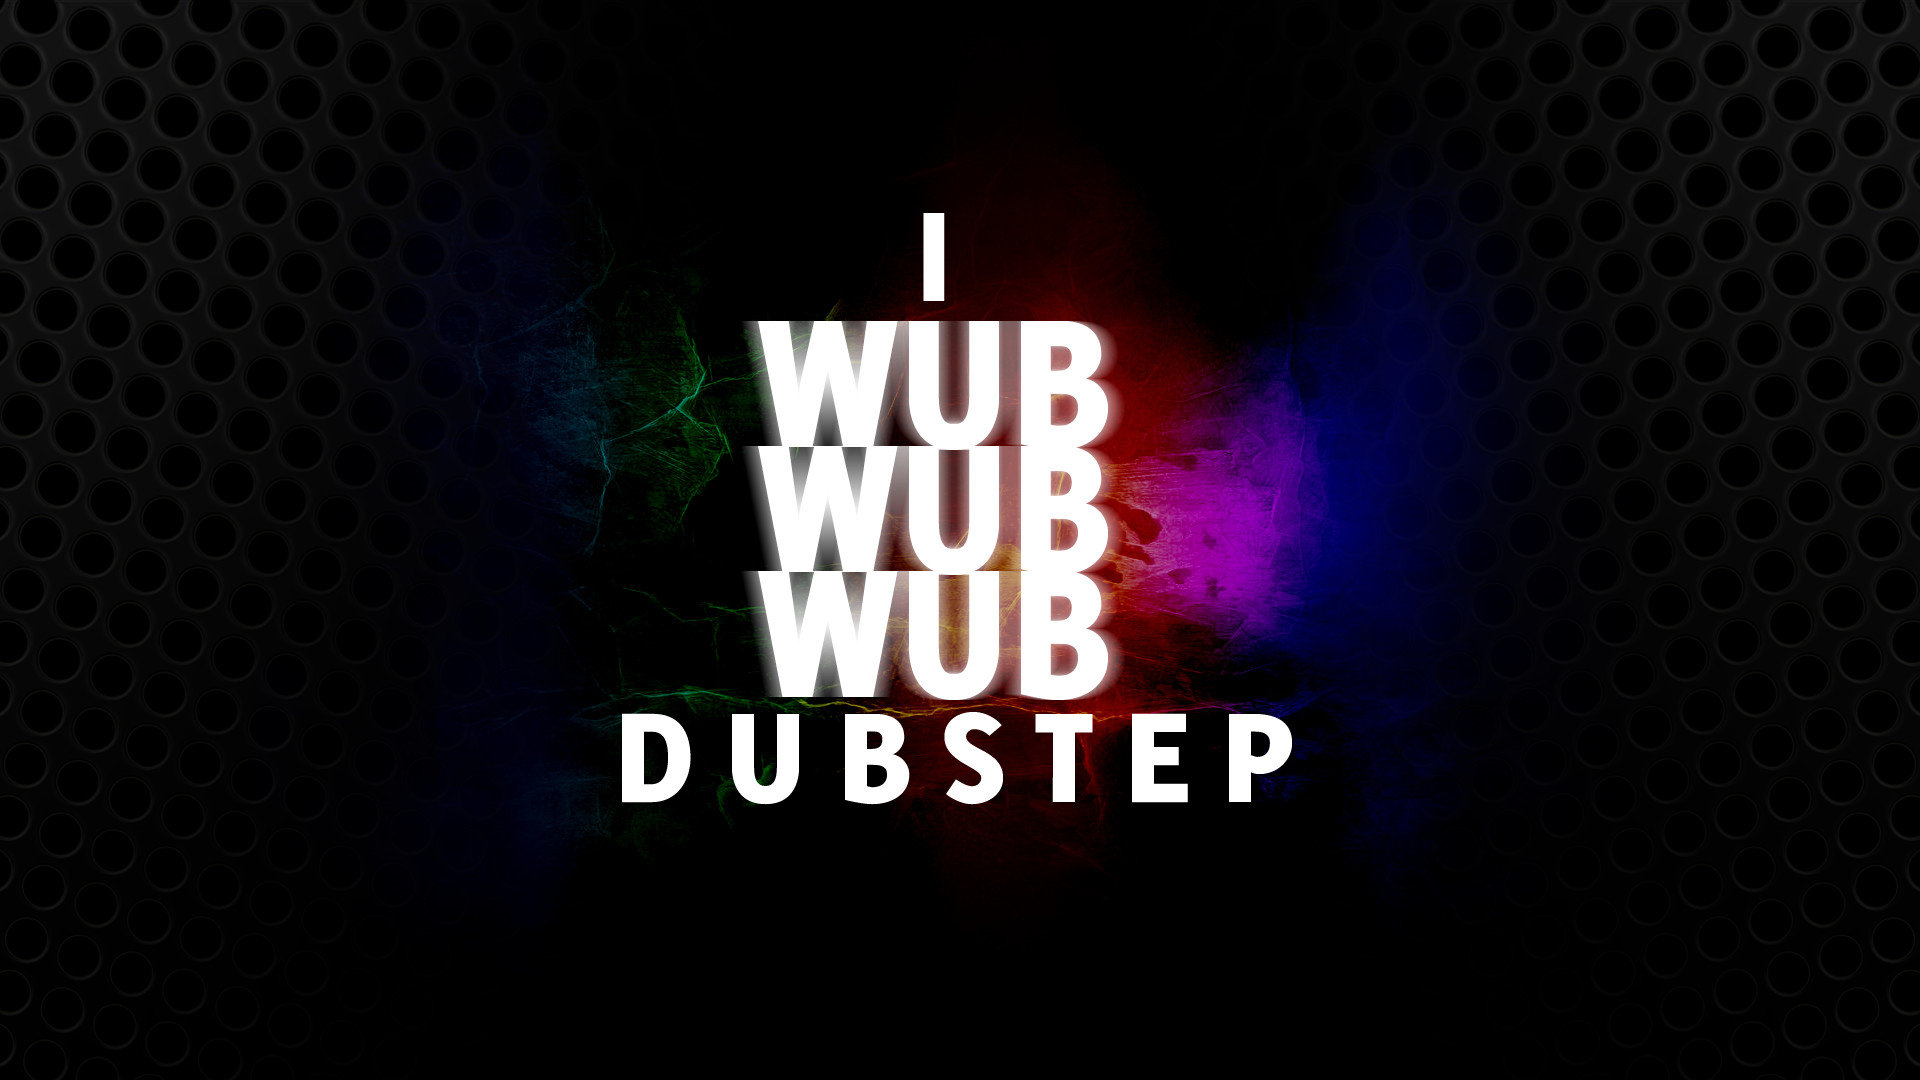 Download 1080p Dubstep PC background ID:11185 for free